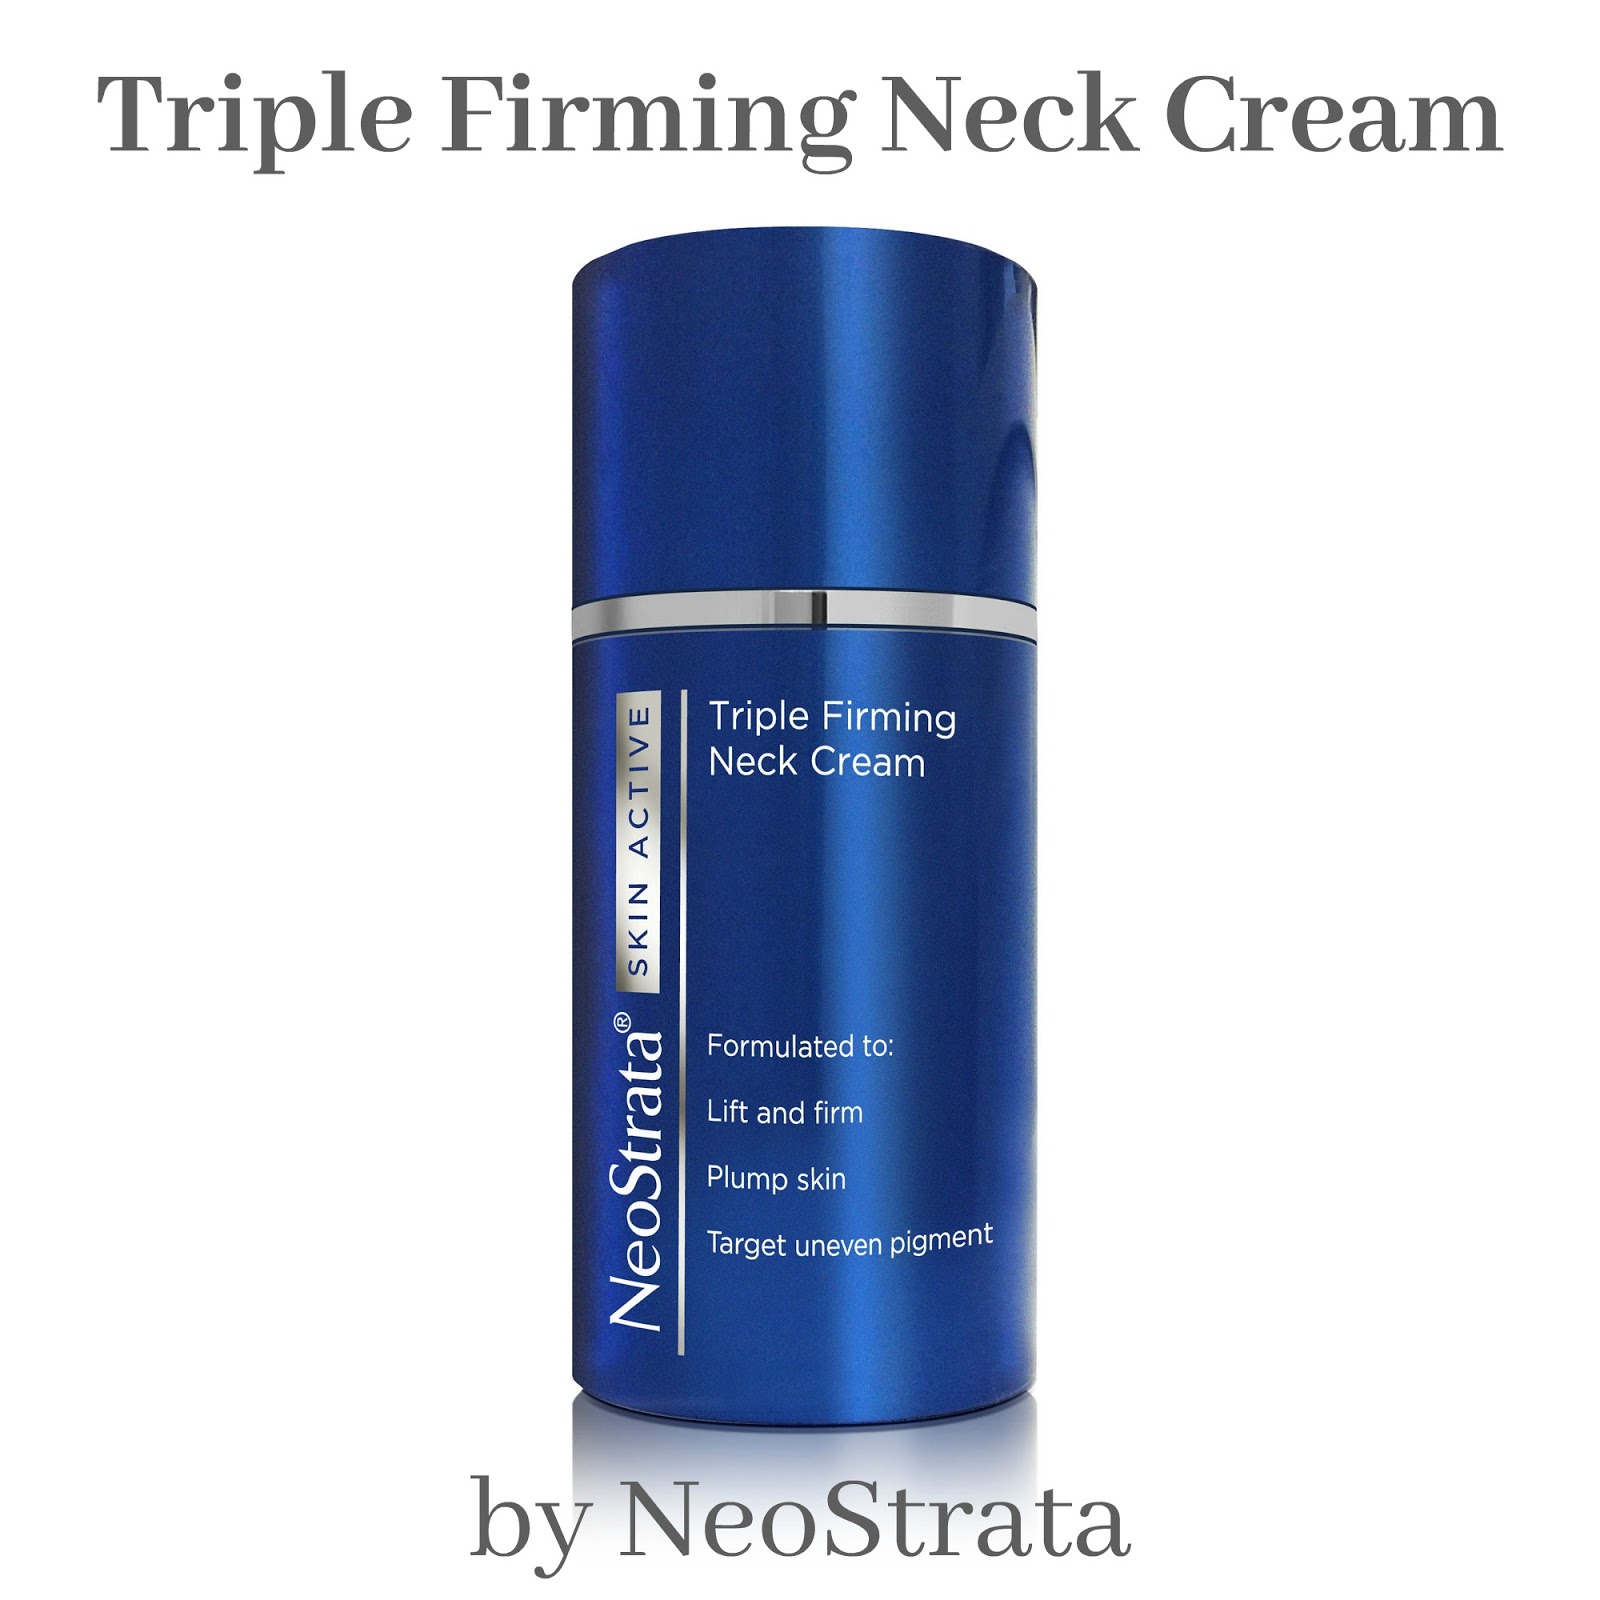 GlamRiver Triple Firming Neck Cream by NeoStrata